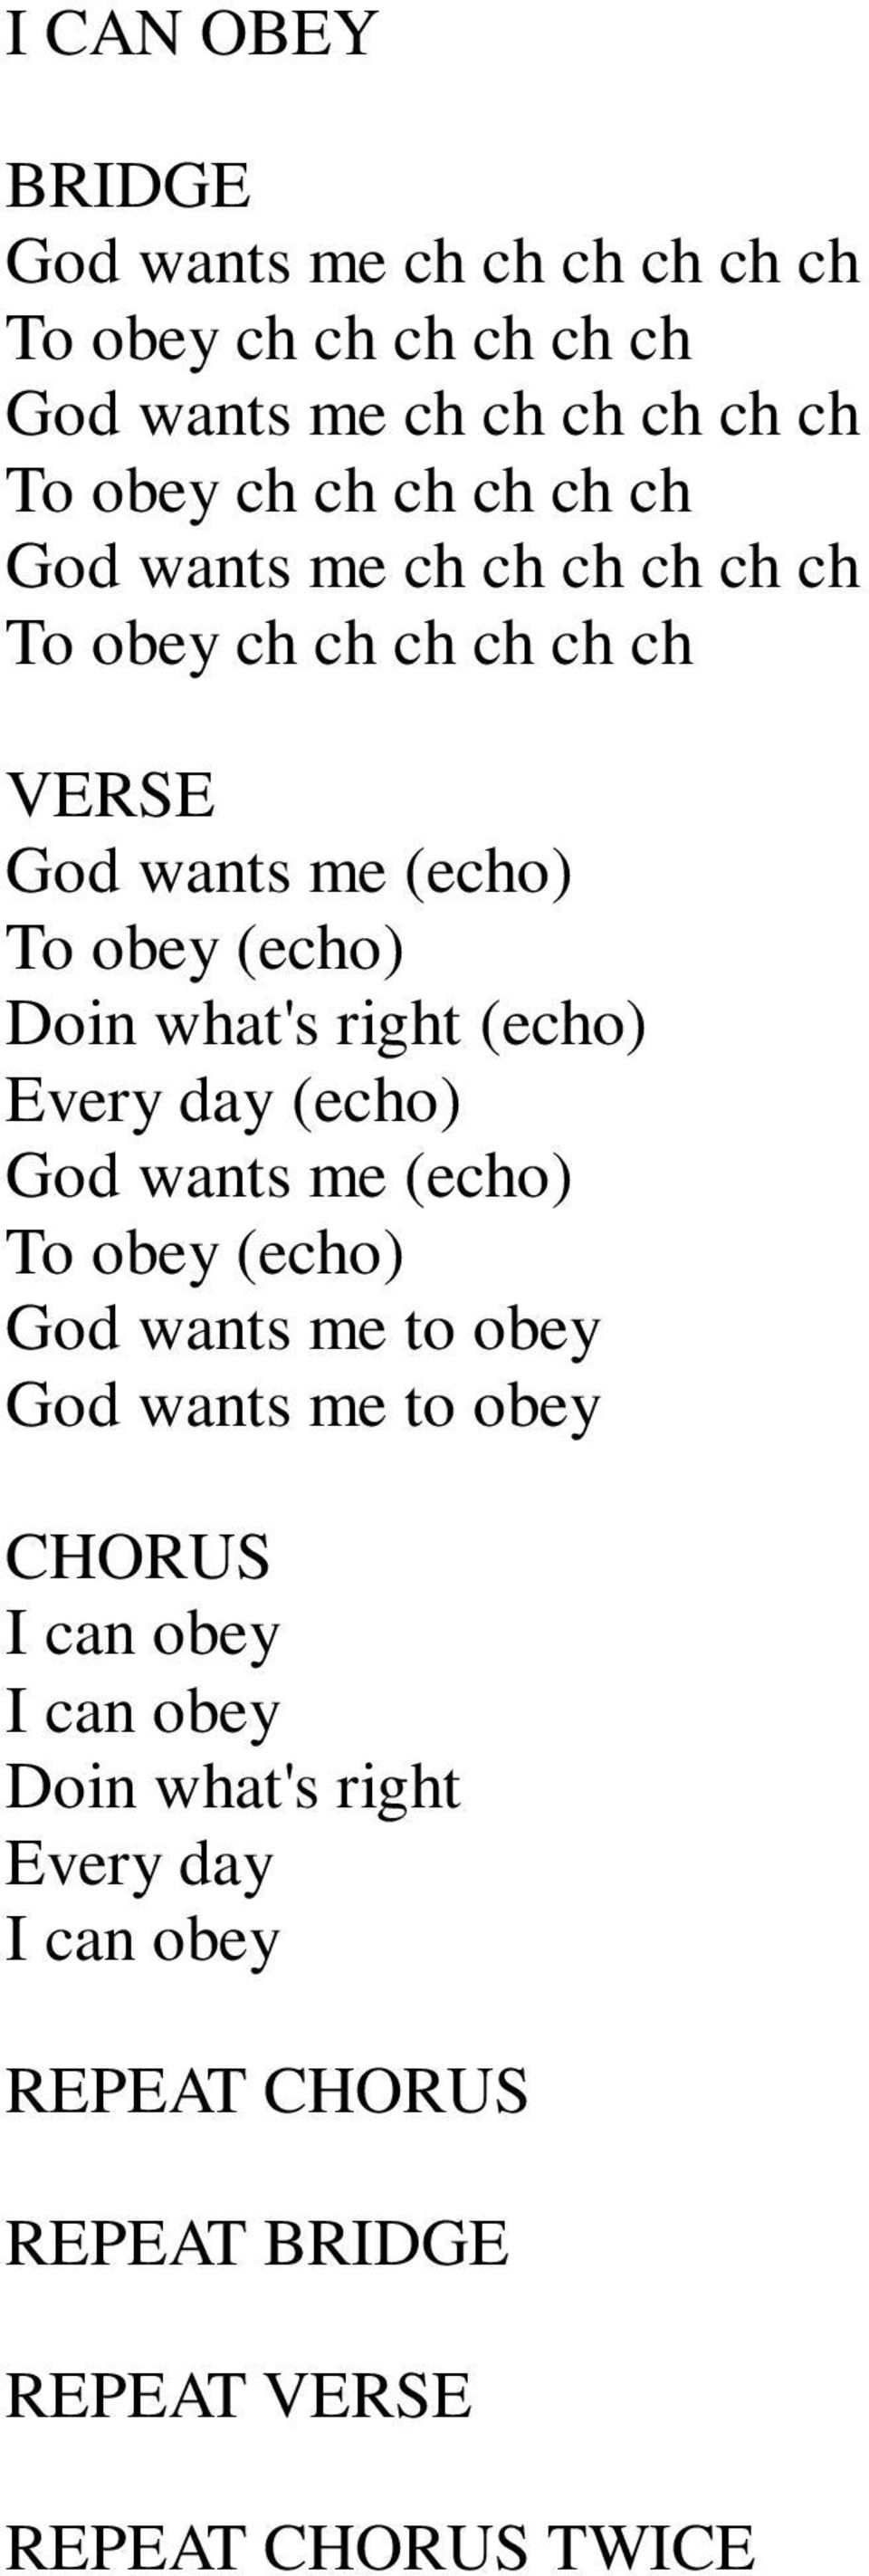 obey (echo) Doin what's right (echo) Every day (echo) God wants me (echo) To obey (echo) God wants me to